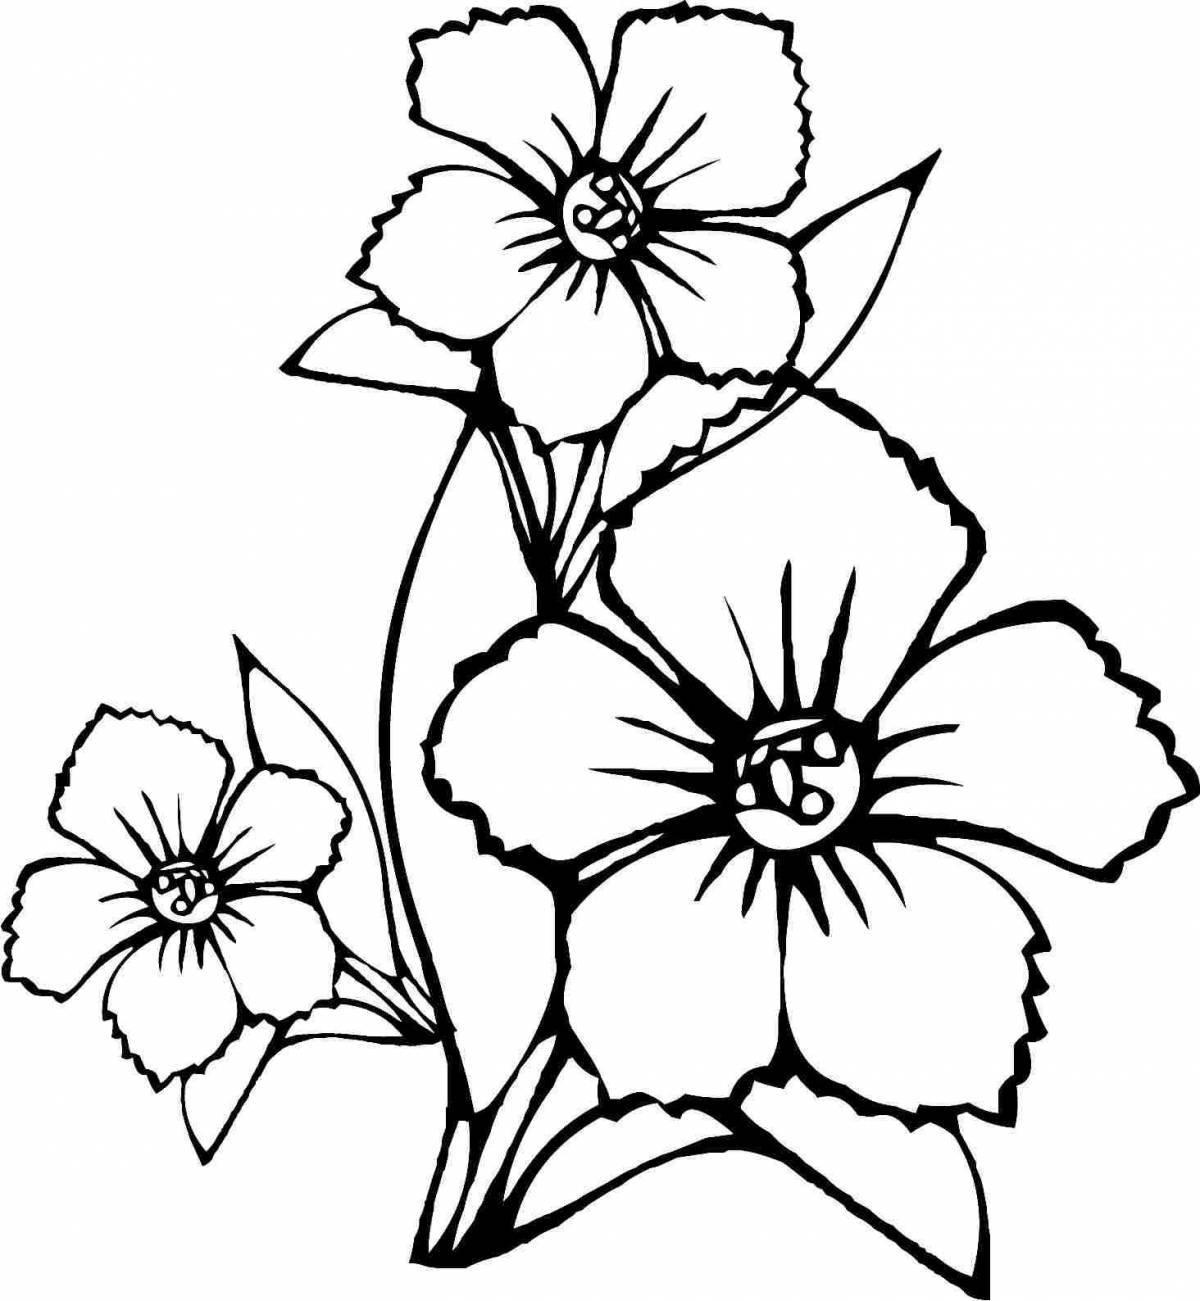 Gorgeous cauliflower coloring page